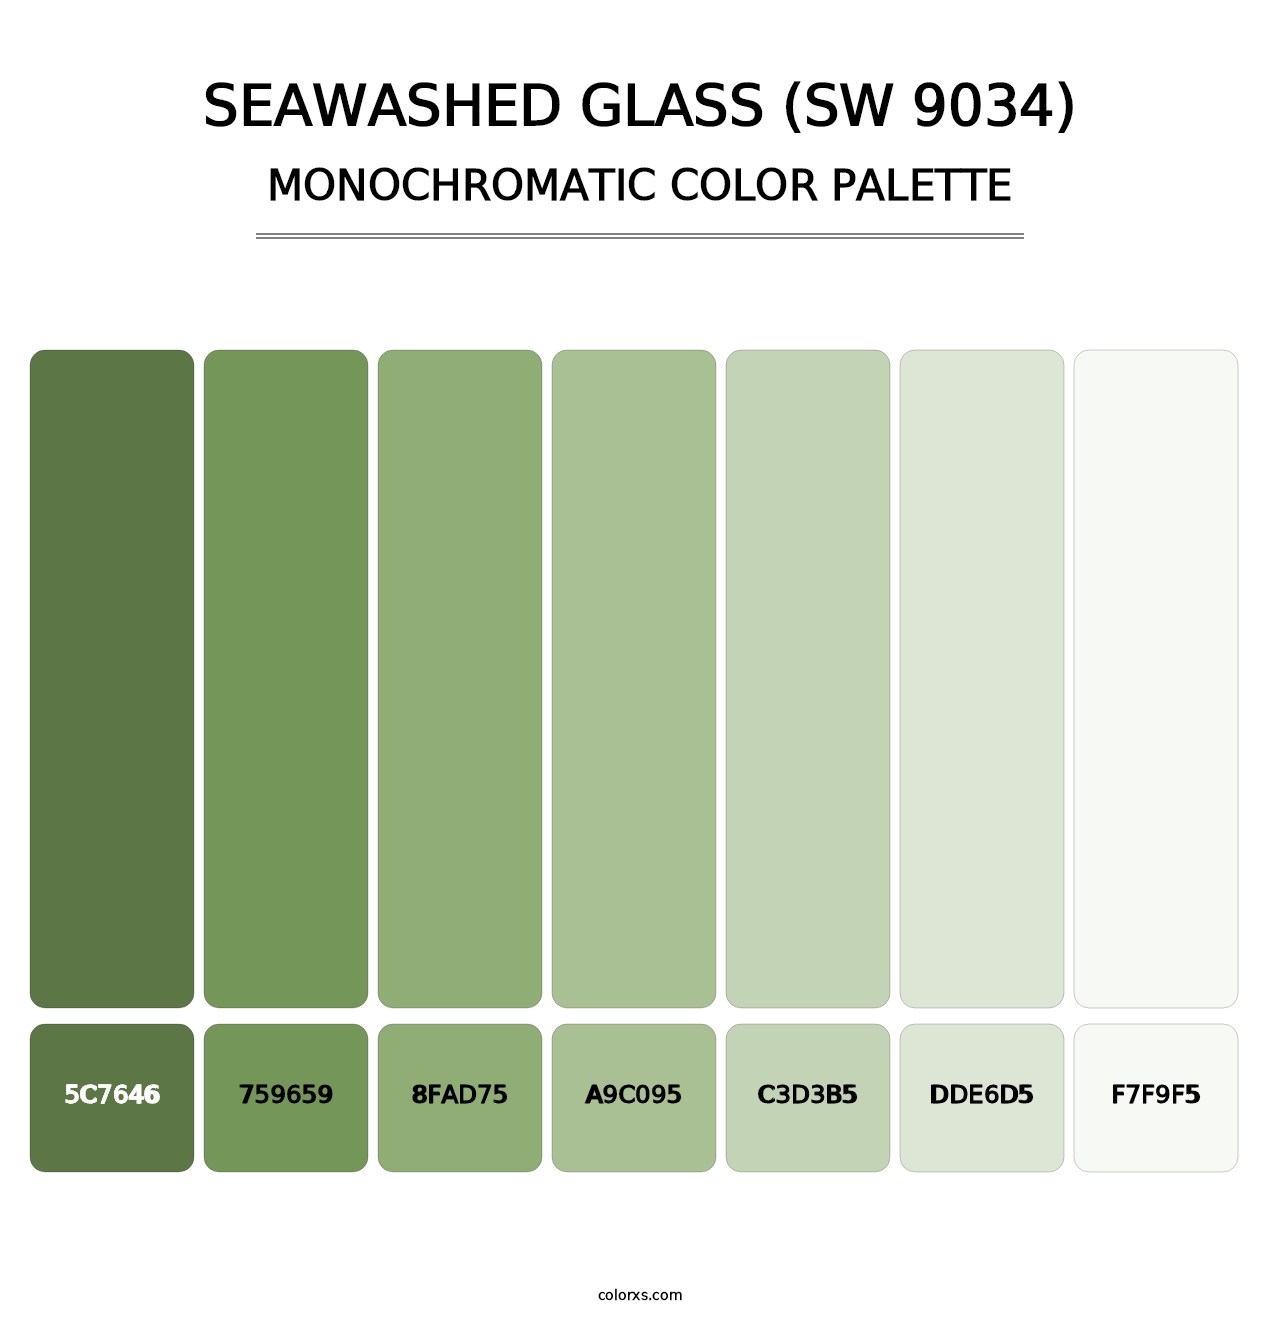 Seawashed Glass (SW 9034) - Monochromatic Color Palette